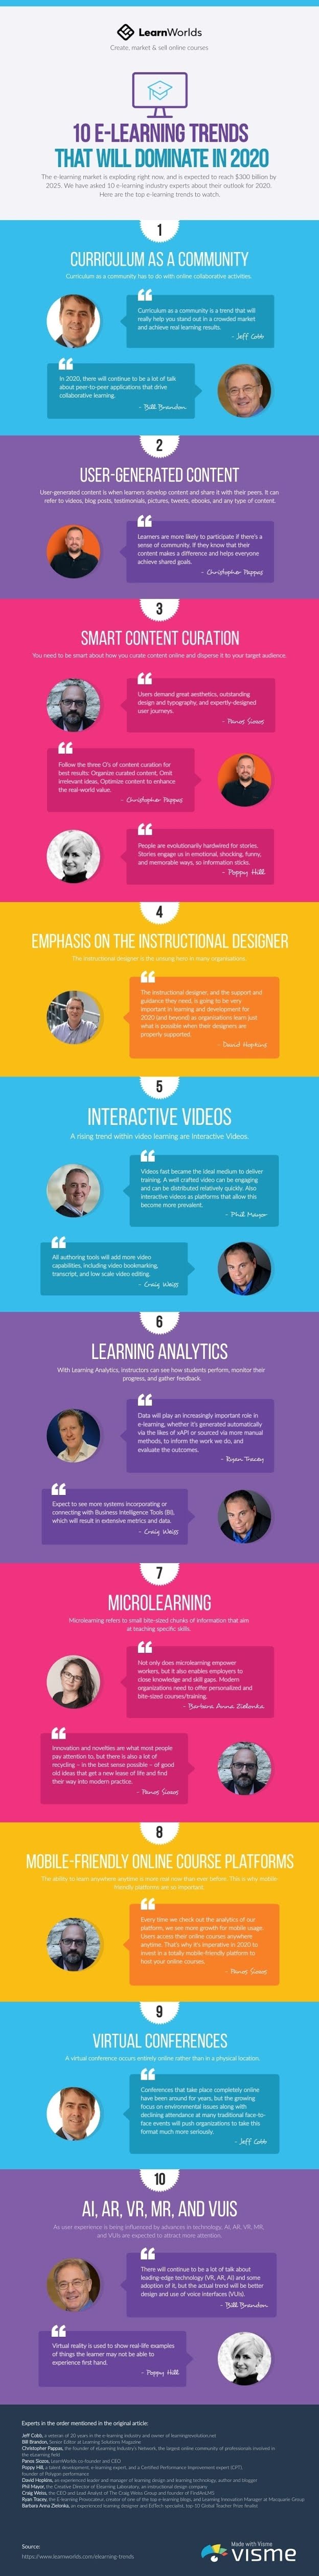 10 eLearning Trends That Will Dominate In 2020 #infographic